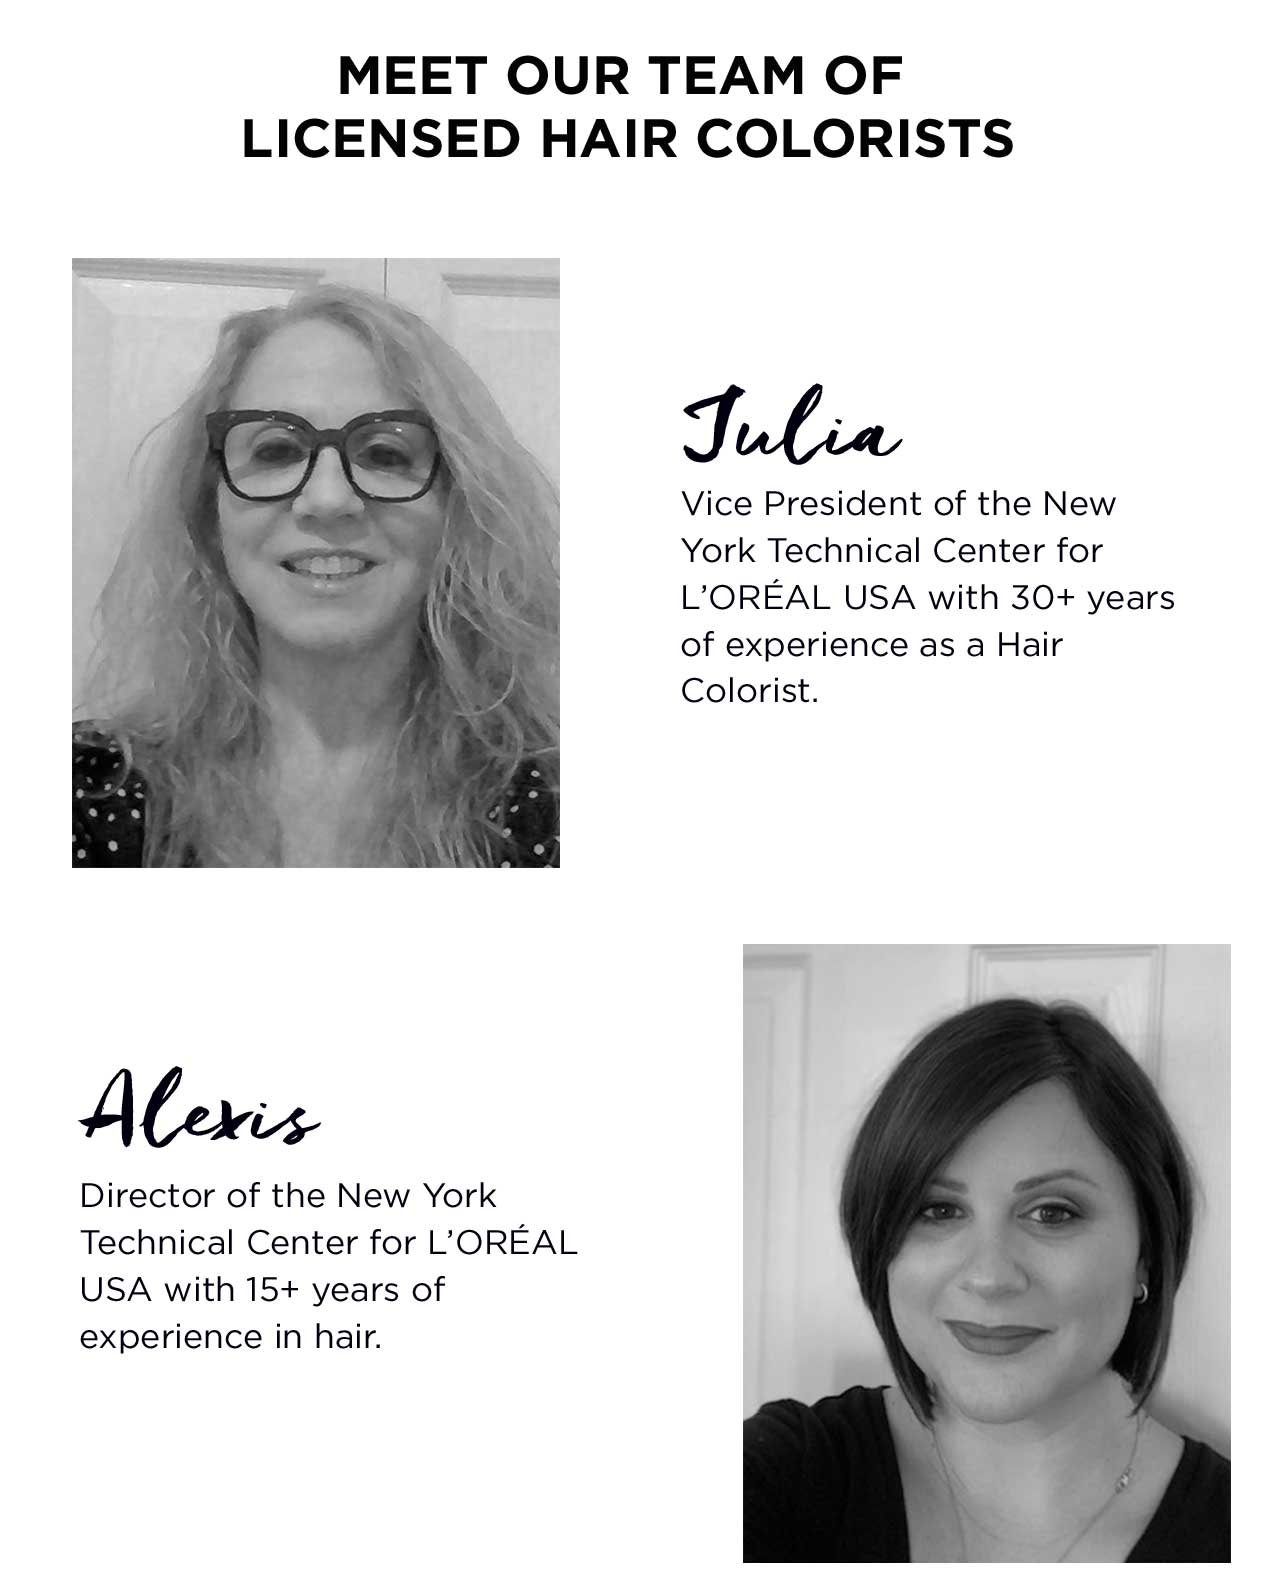 Julia-VP of the NY Technical Center for L'Oréal USA with 30 plus years of experience as a Hair Colorist. - Alexis-Director of the NY Technical Center for L'Oréal USA with 15 plus years of experience in hair.